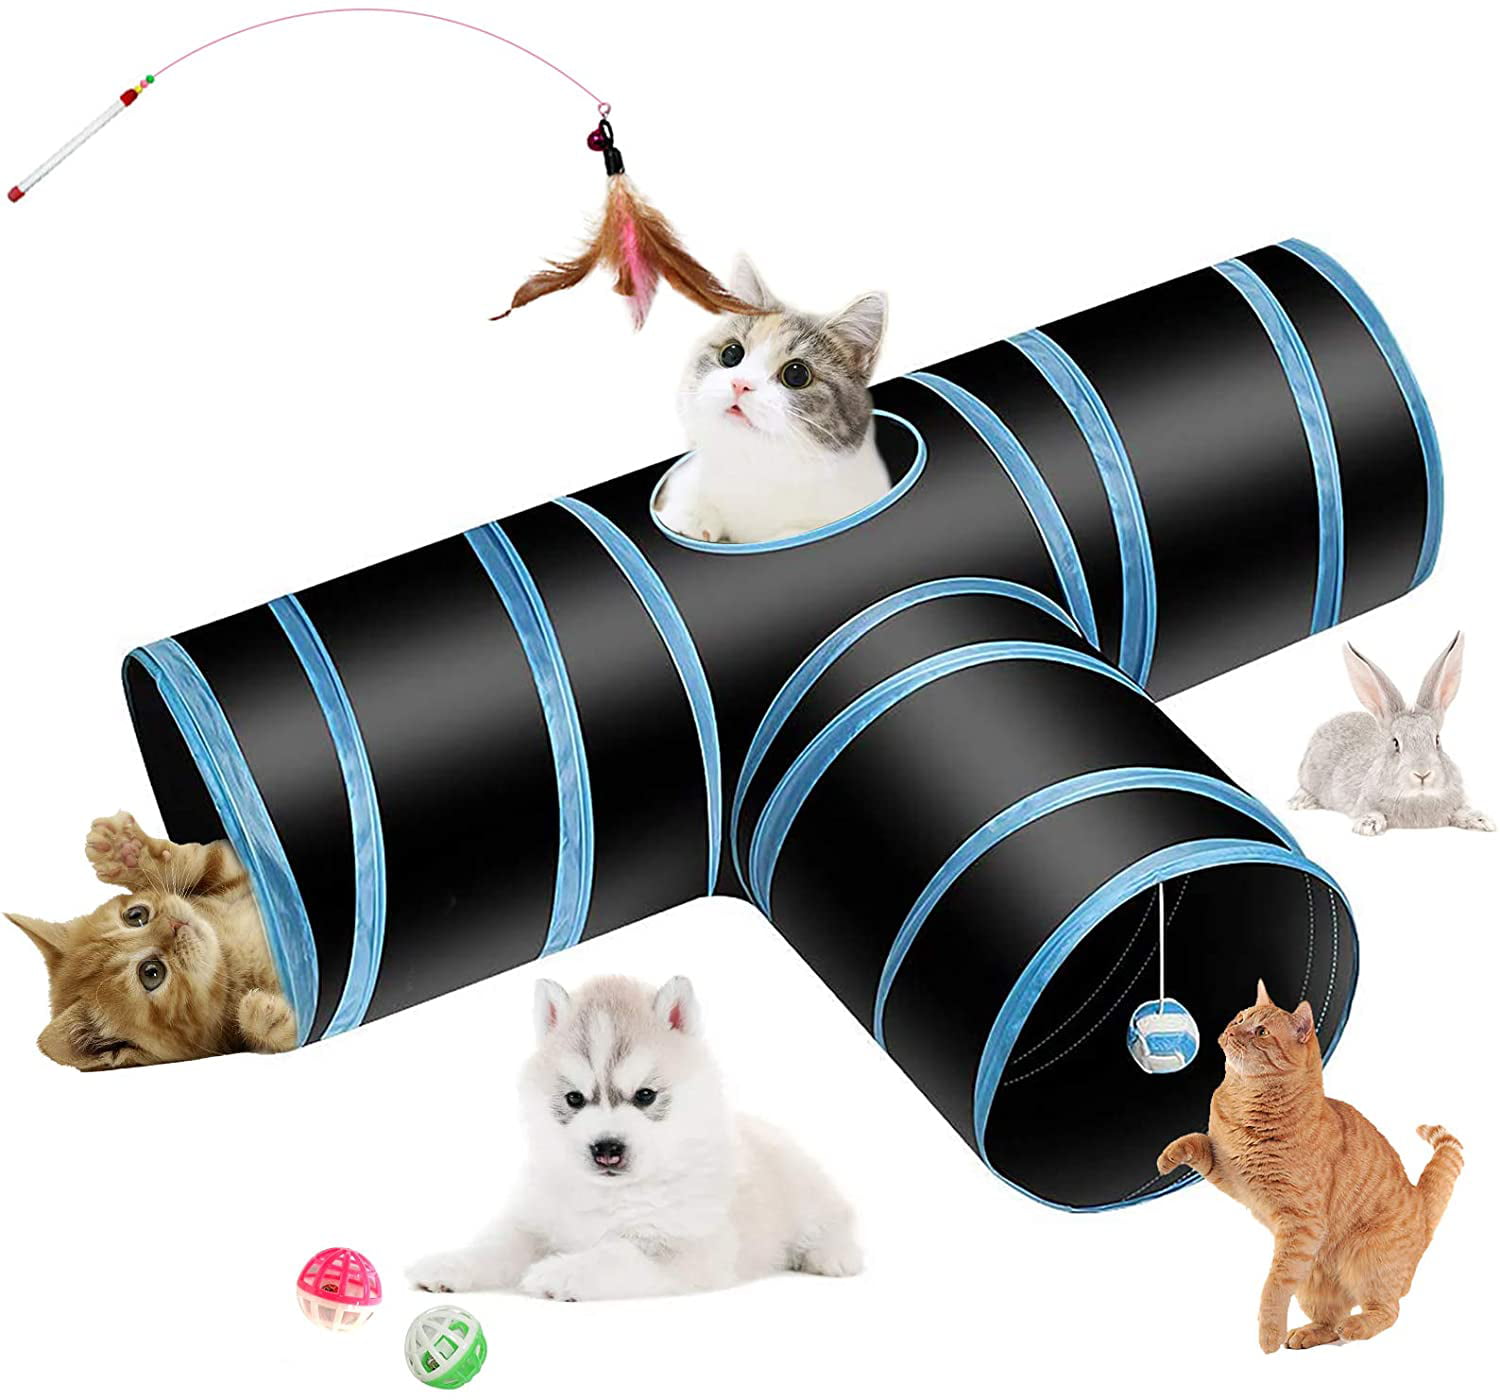 3 Way Tube Collapsible Tunnel Cat Kitten Rabbit Play Tunnels Foldable Pet Toys 